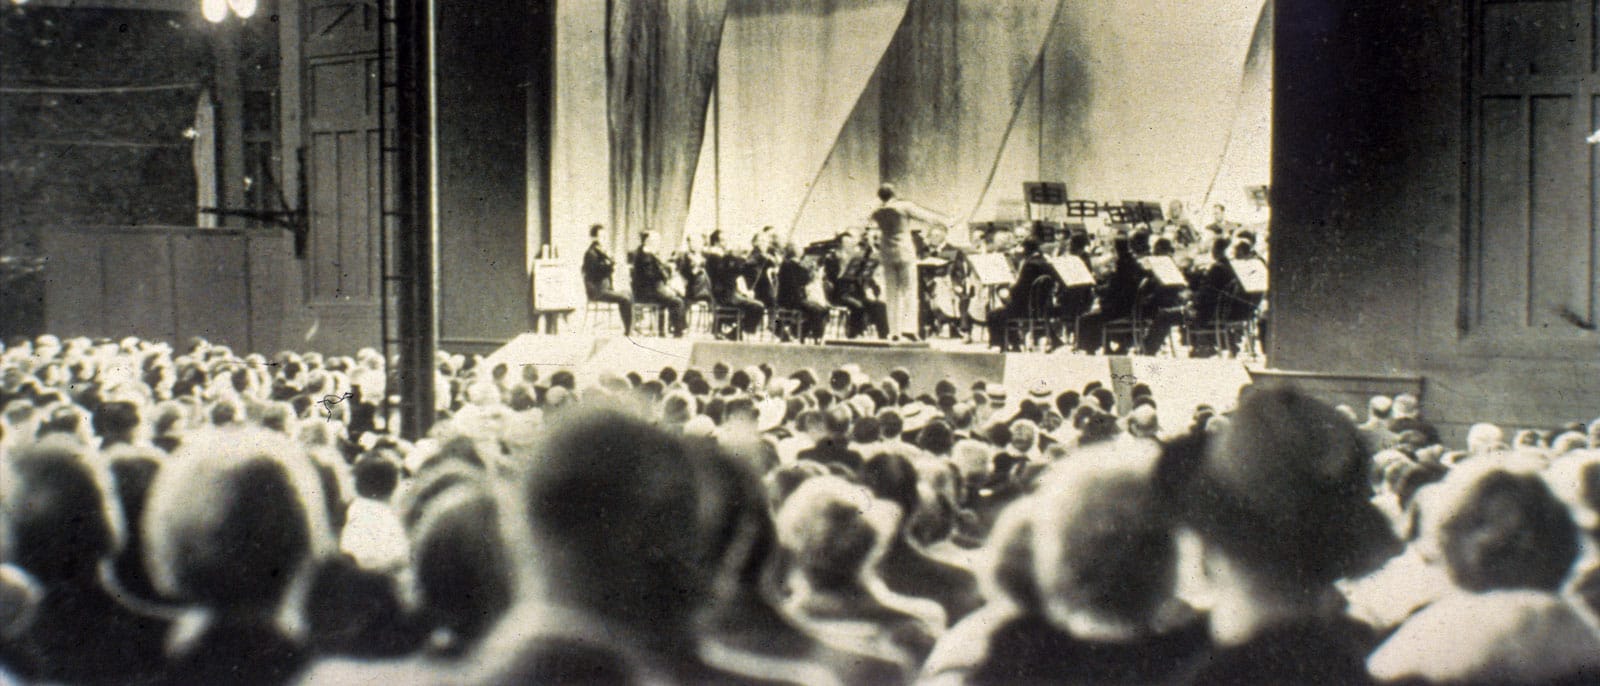 Vintage photo of a crowd of people watching an orchestral performance on stage